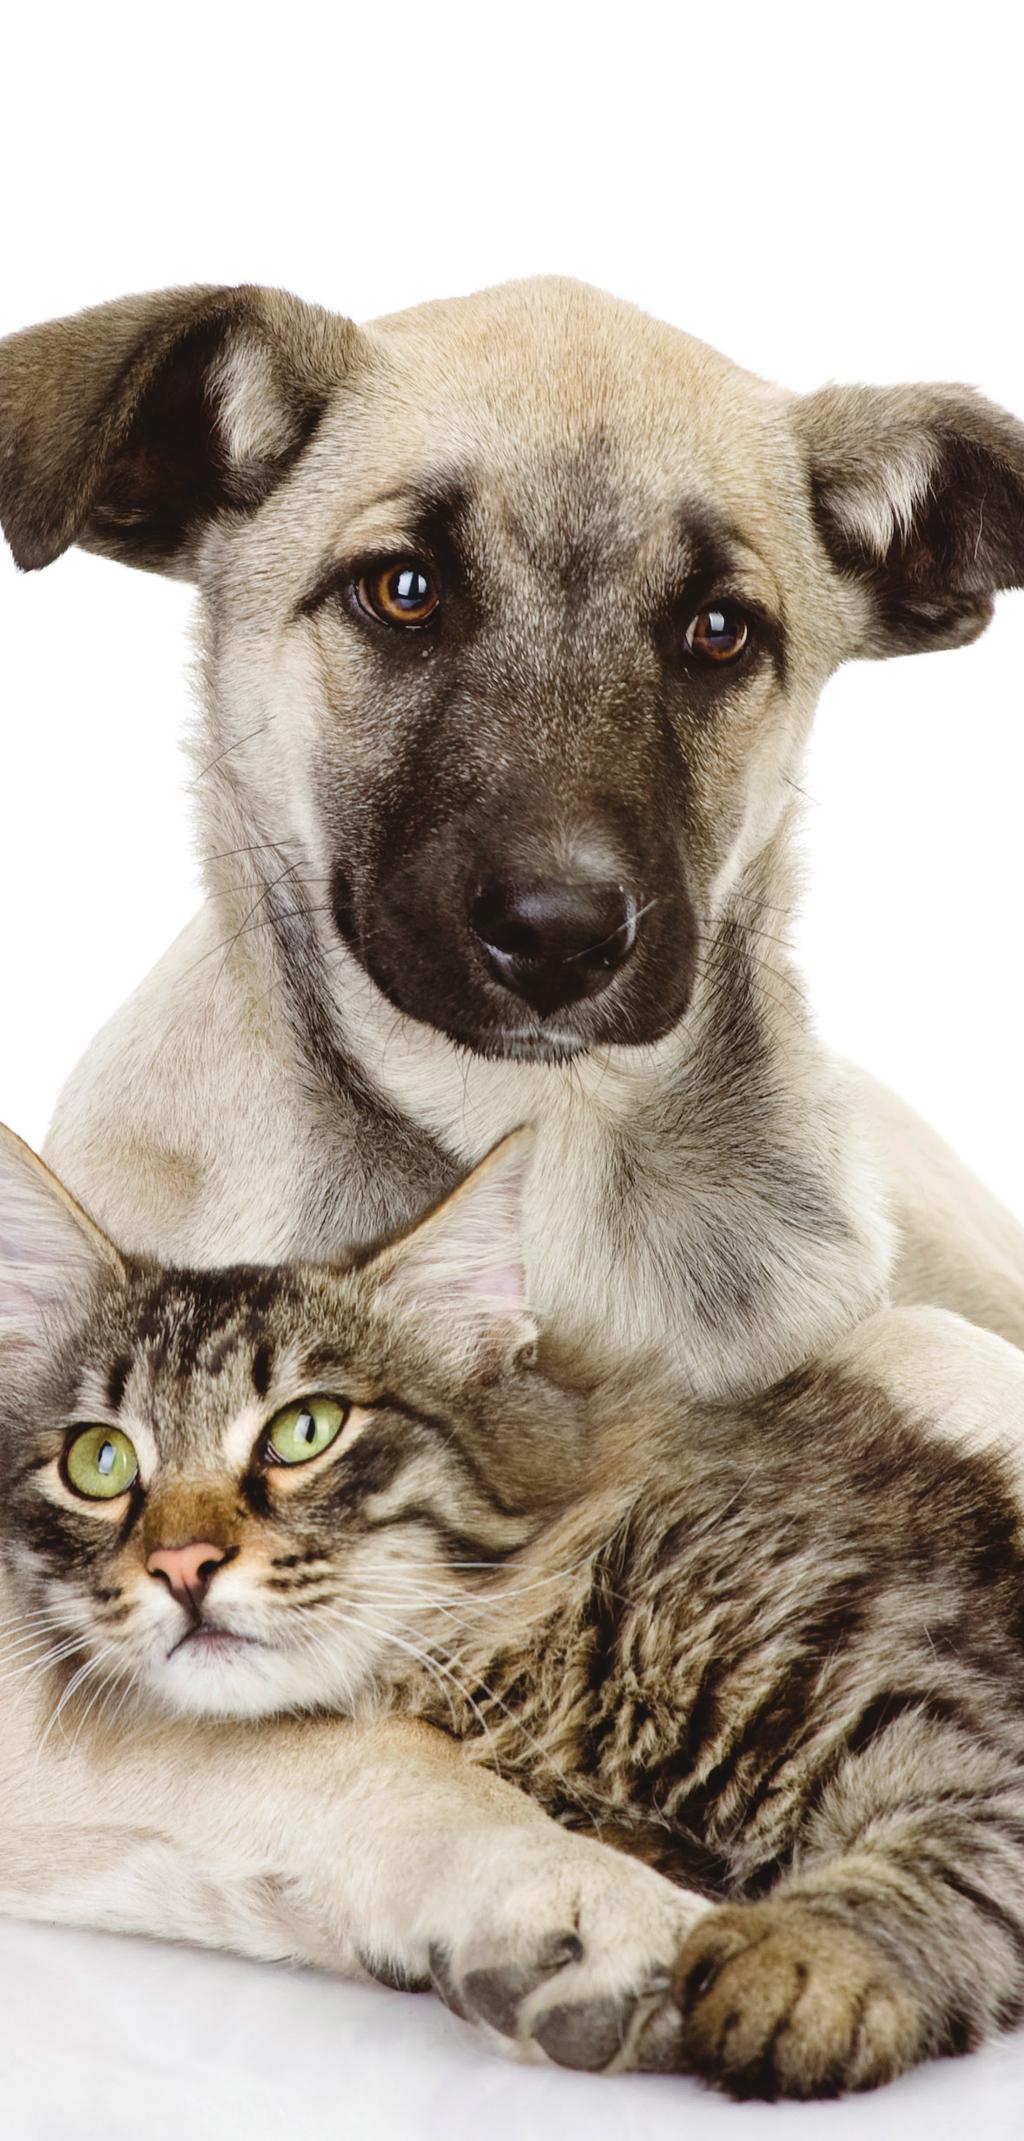 Your Pet Health Plan Agreement details When you complete the Pet Health Plans application form at your practice, you will find these details on the back of the form you sign.